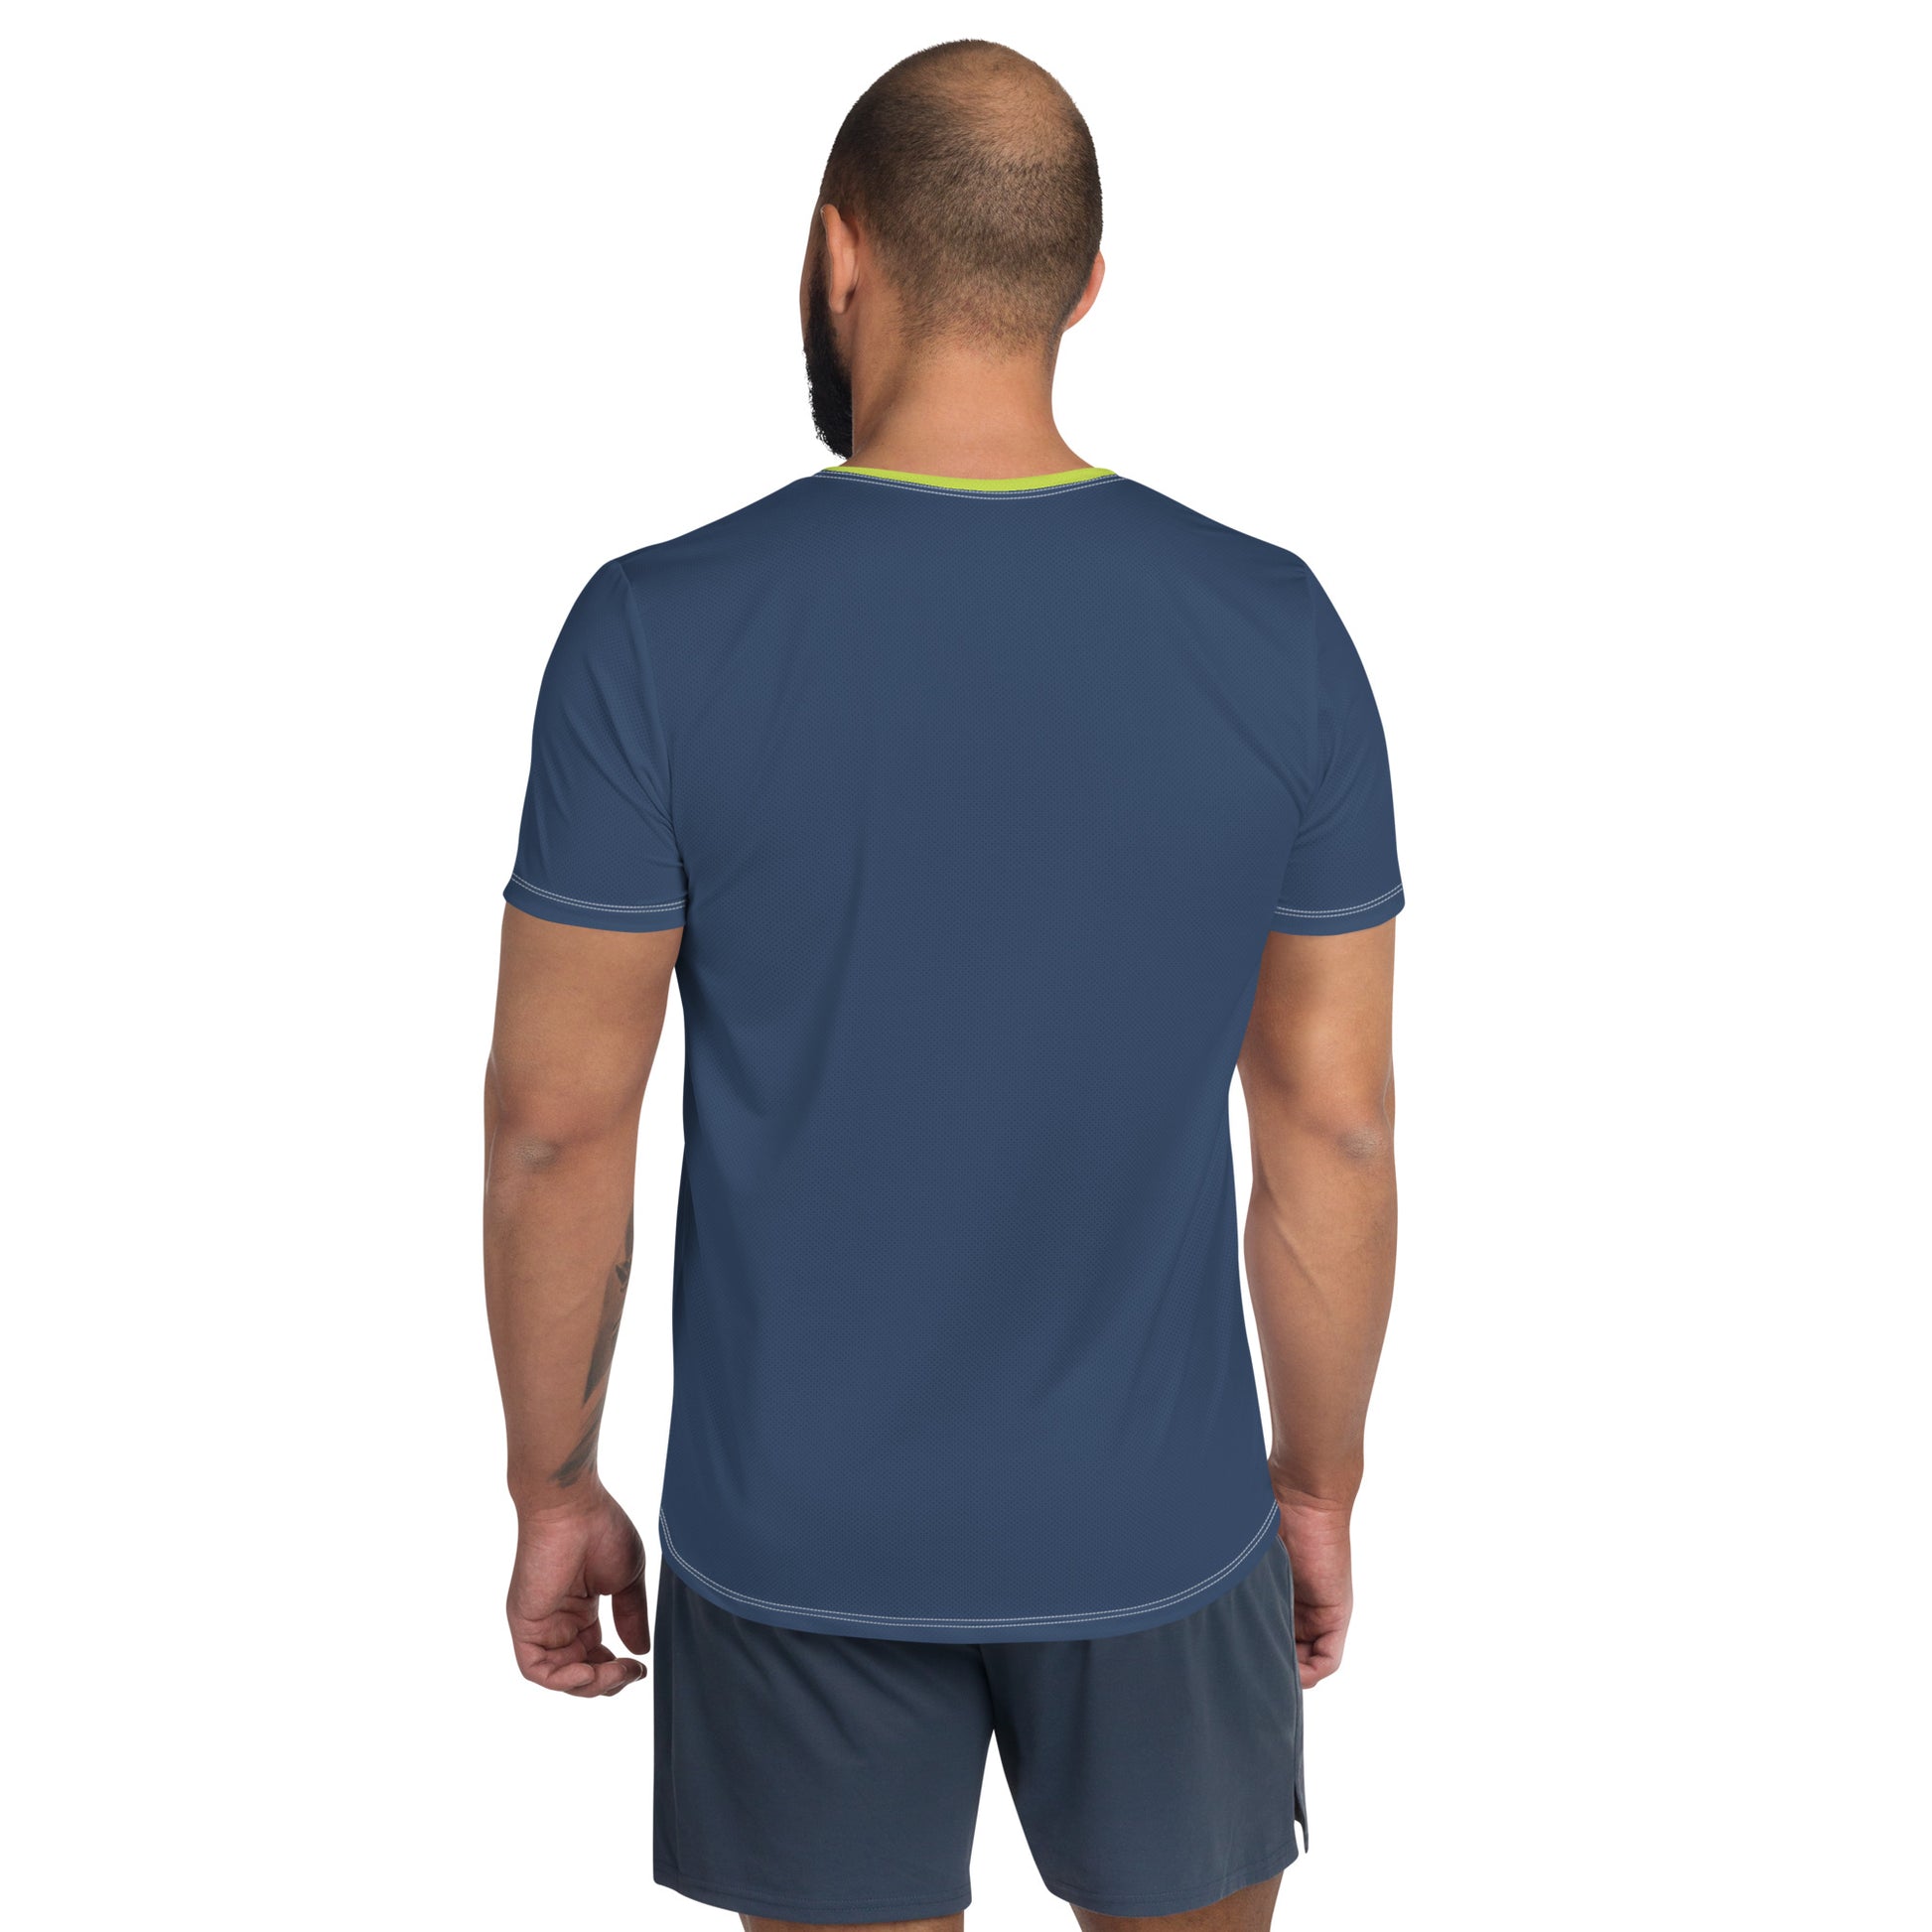 TIME OF VIBES - Men's Athletic T-shirt FIRST (Cello/Mindaro) - €45.00